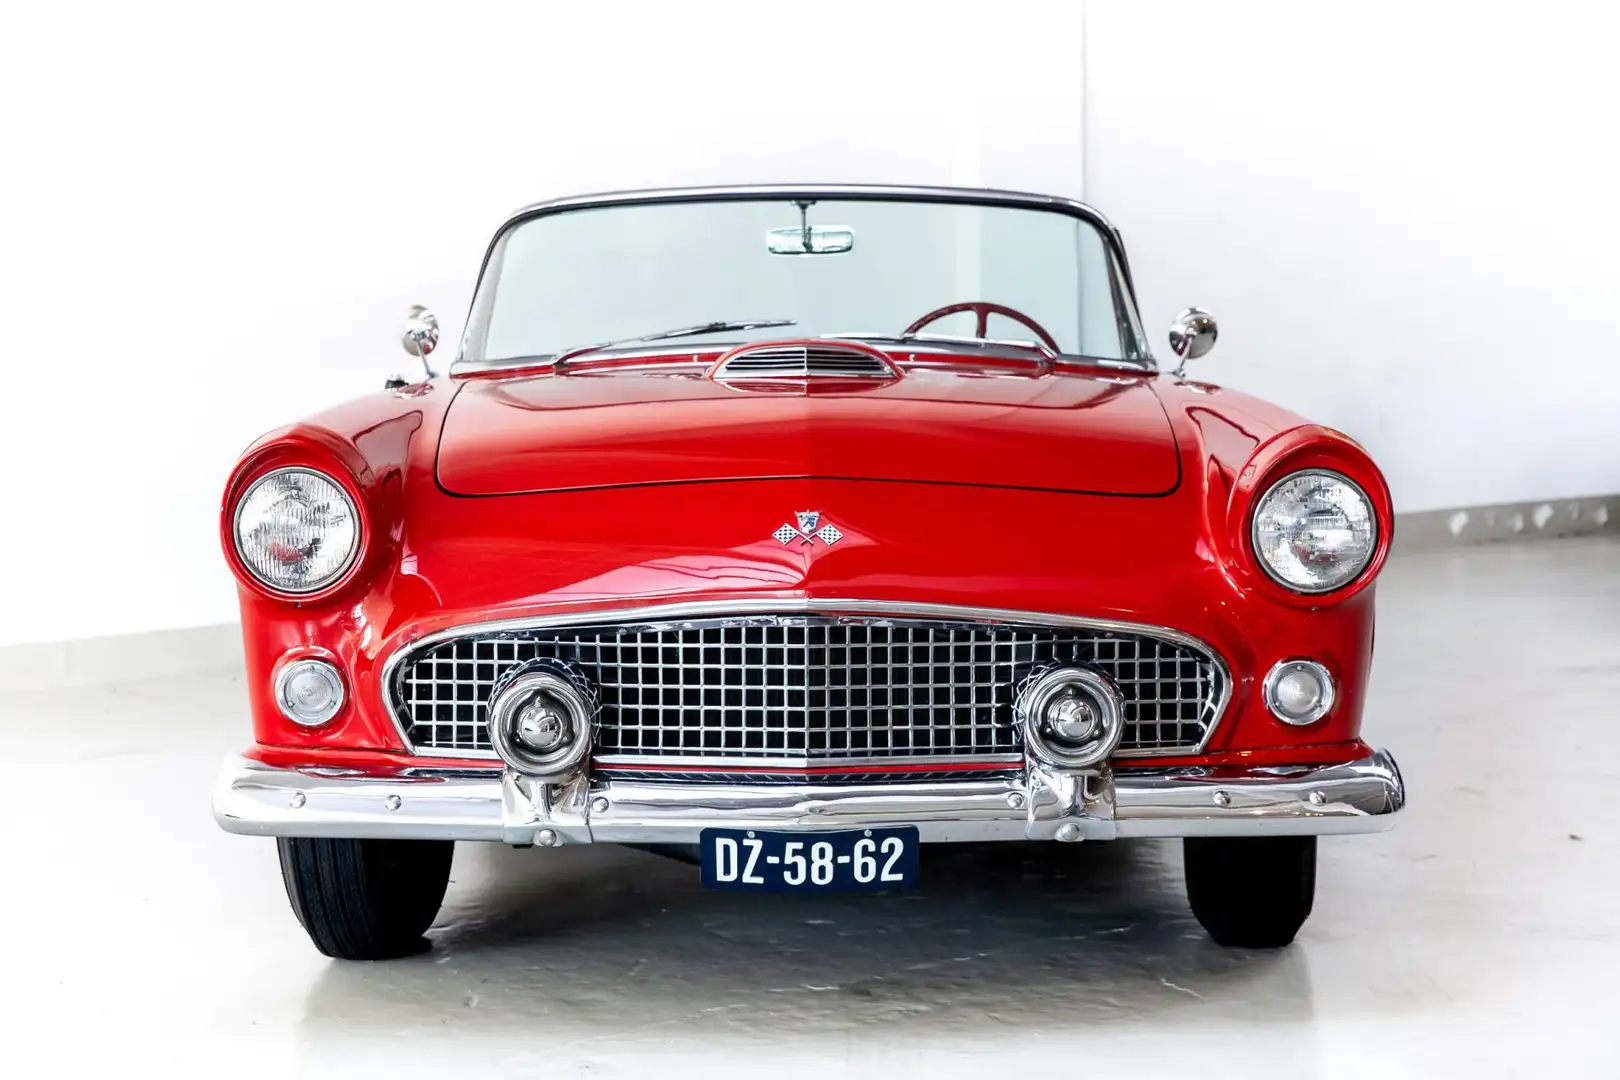 Ford Thunderbird - Y Block V8 - Collectors Car Red - 2